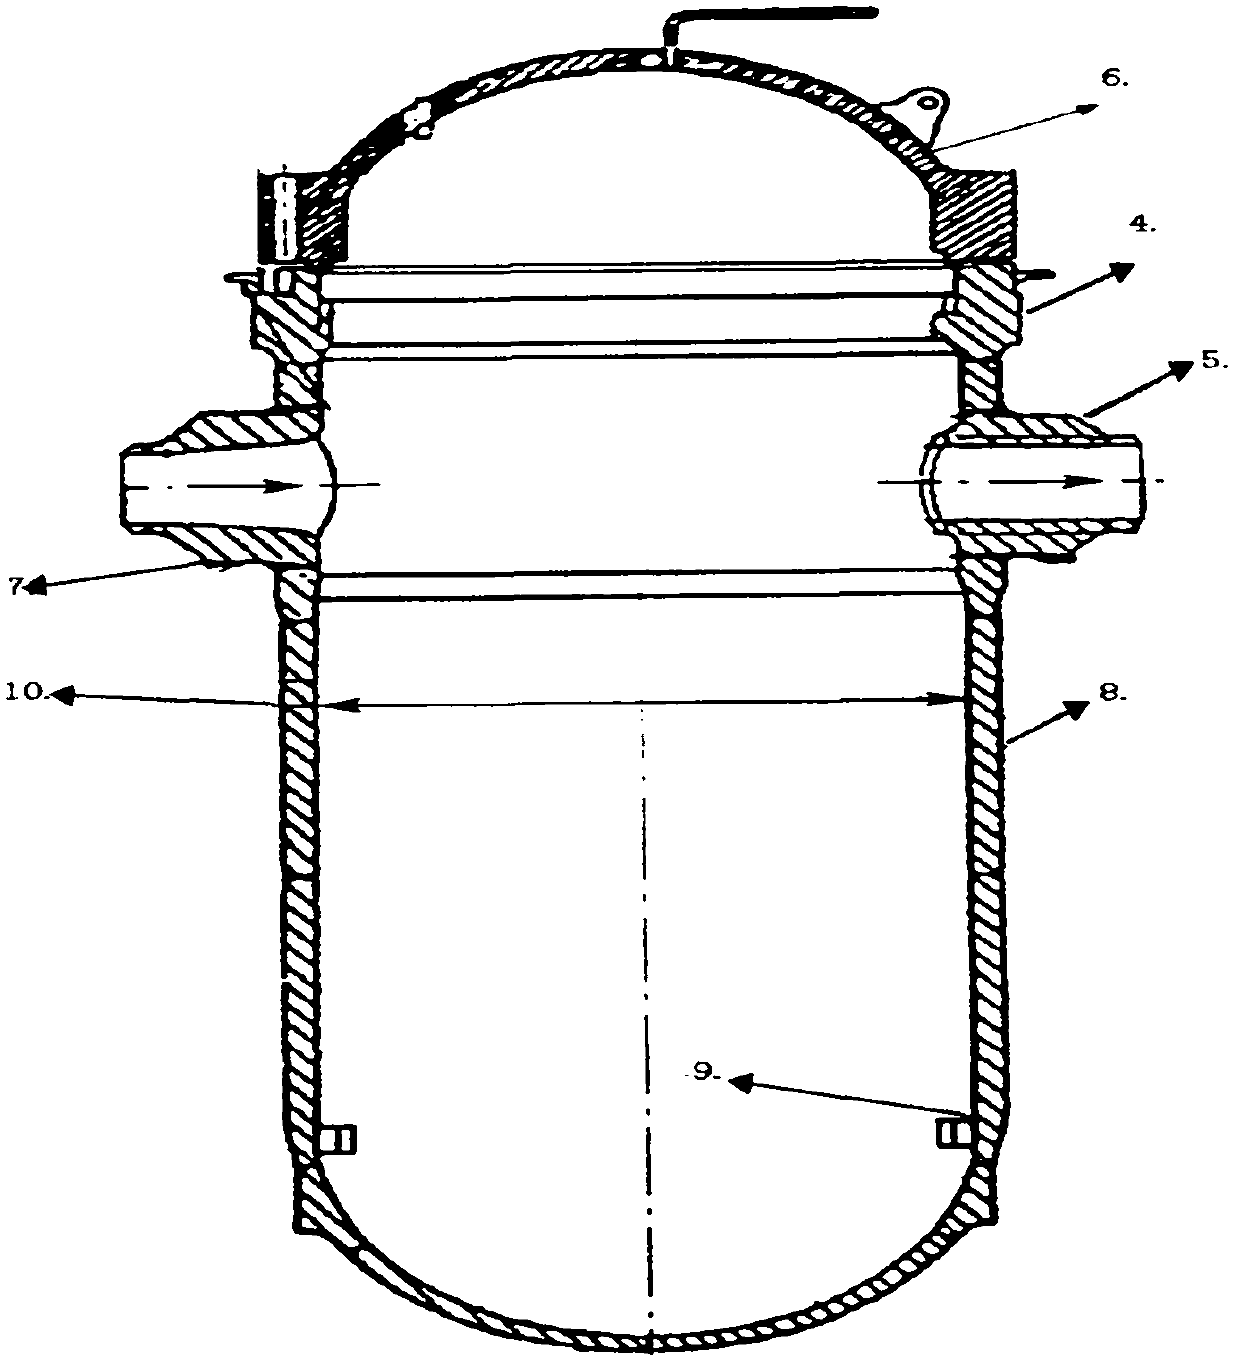 C-shaped cladding sealing ring of built-in spring and manufacturing method thereof